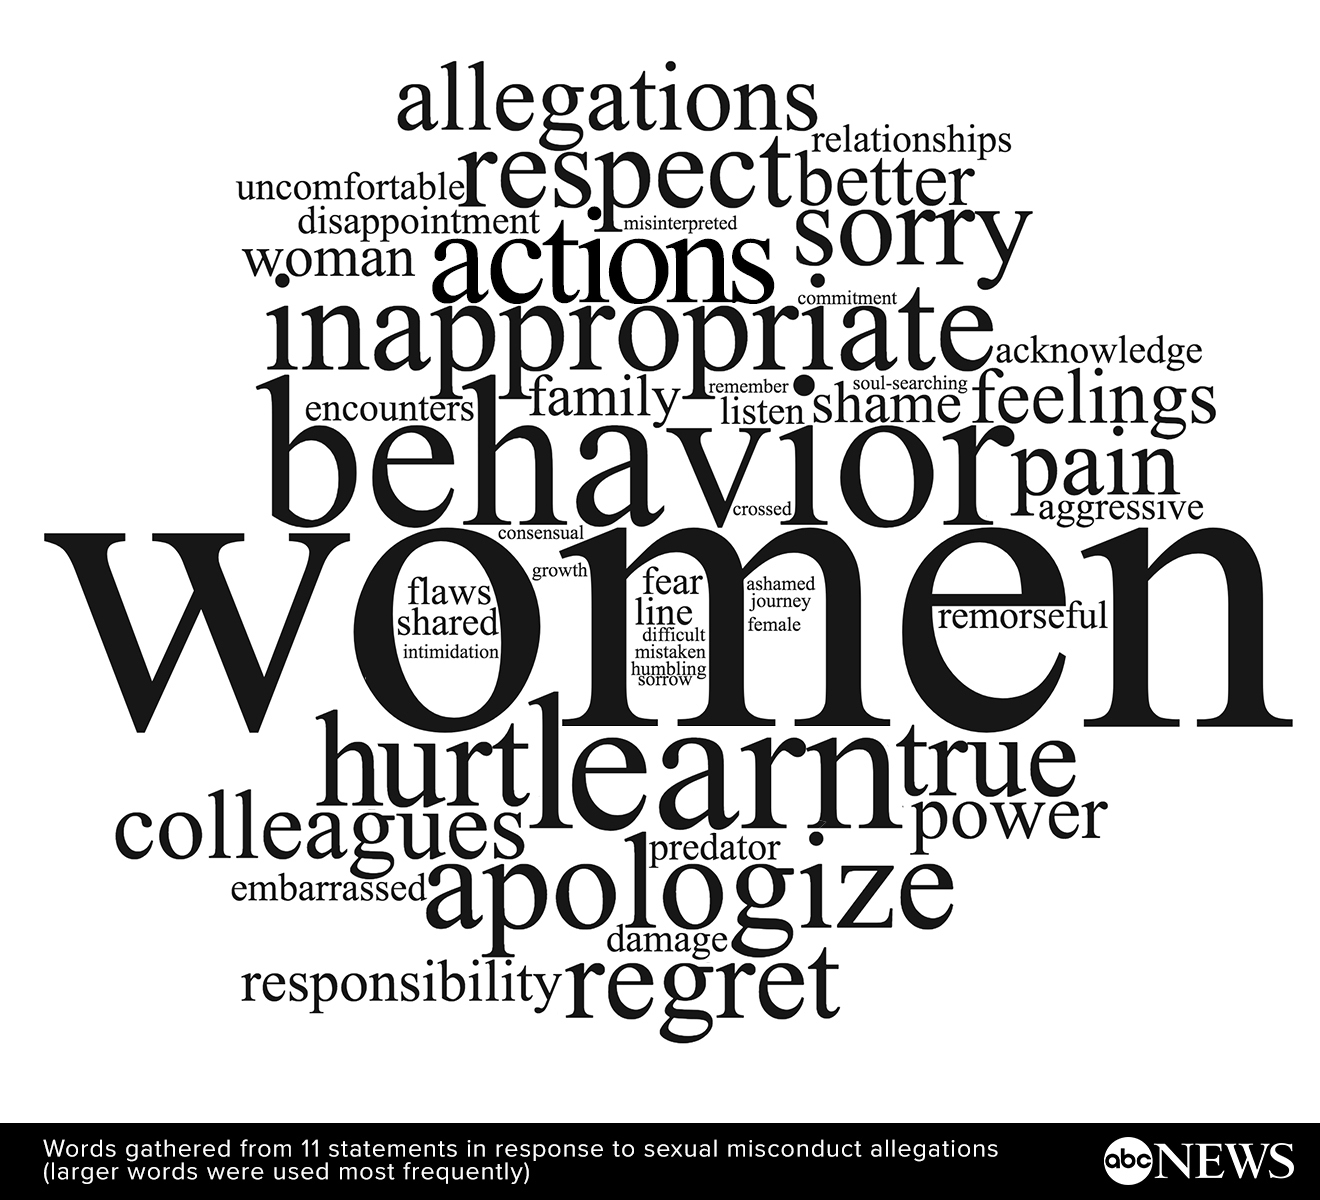 PHOTO: Words gathered from 11 statements in response to sexual misconduct allegations.